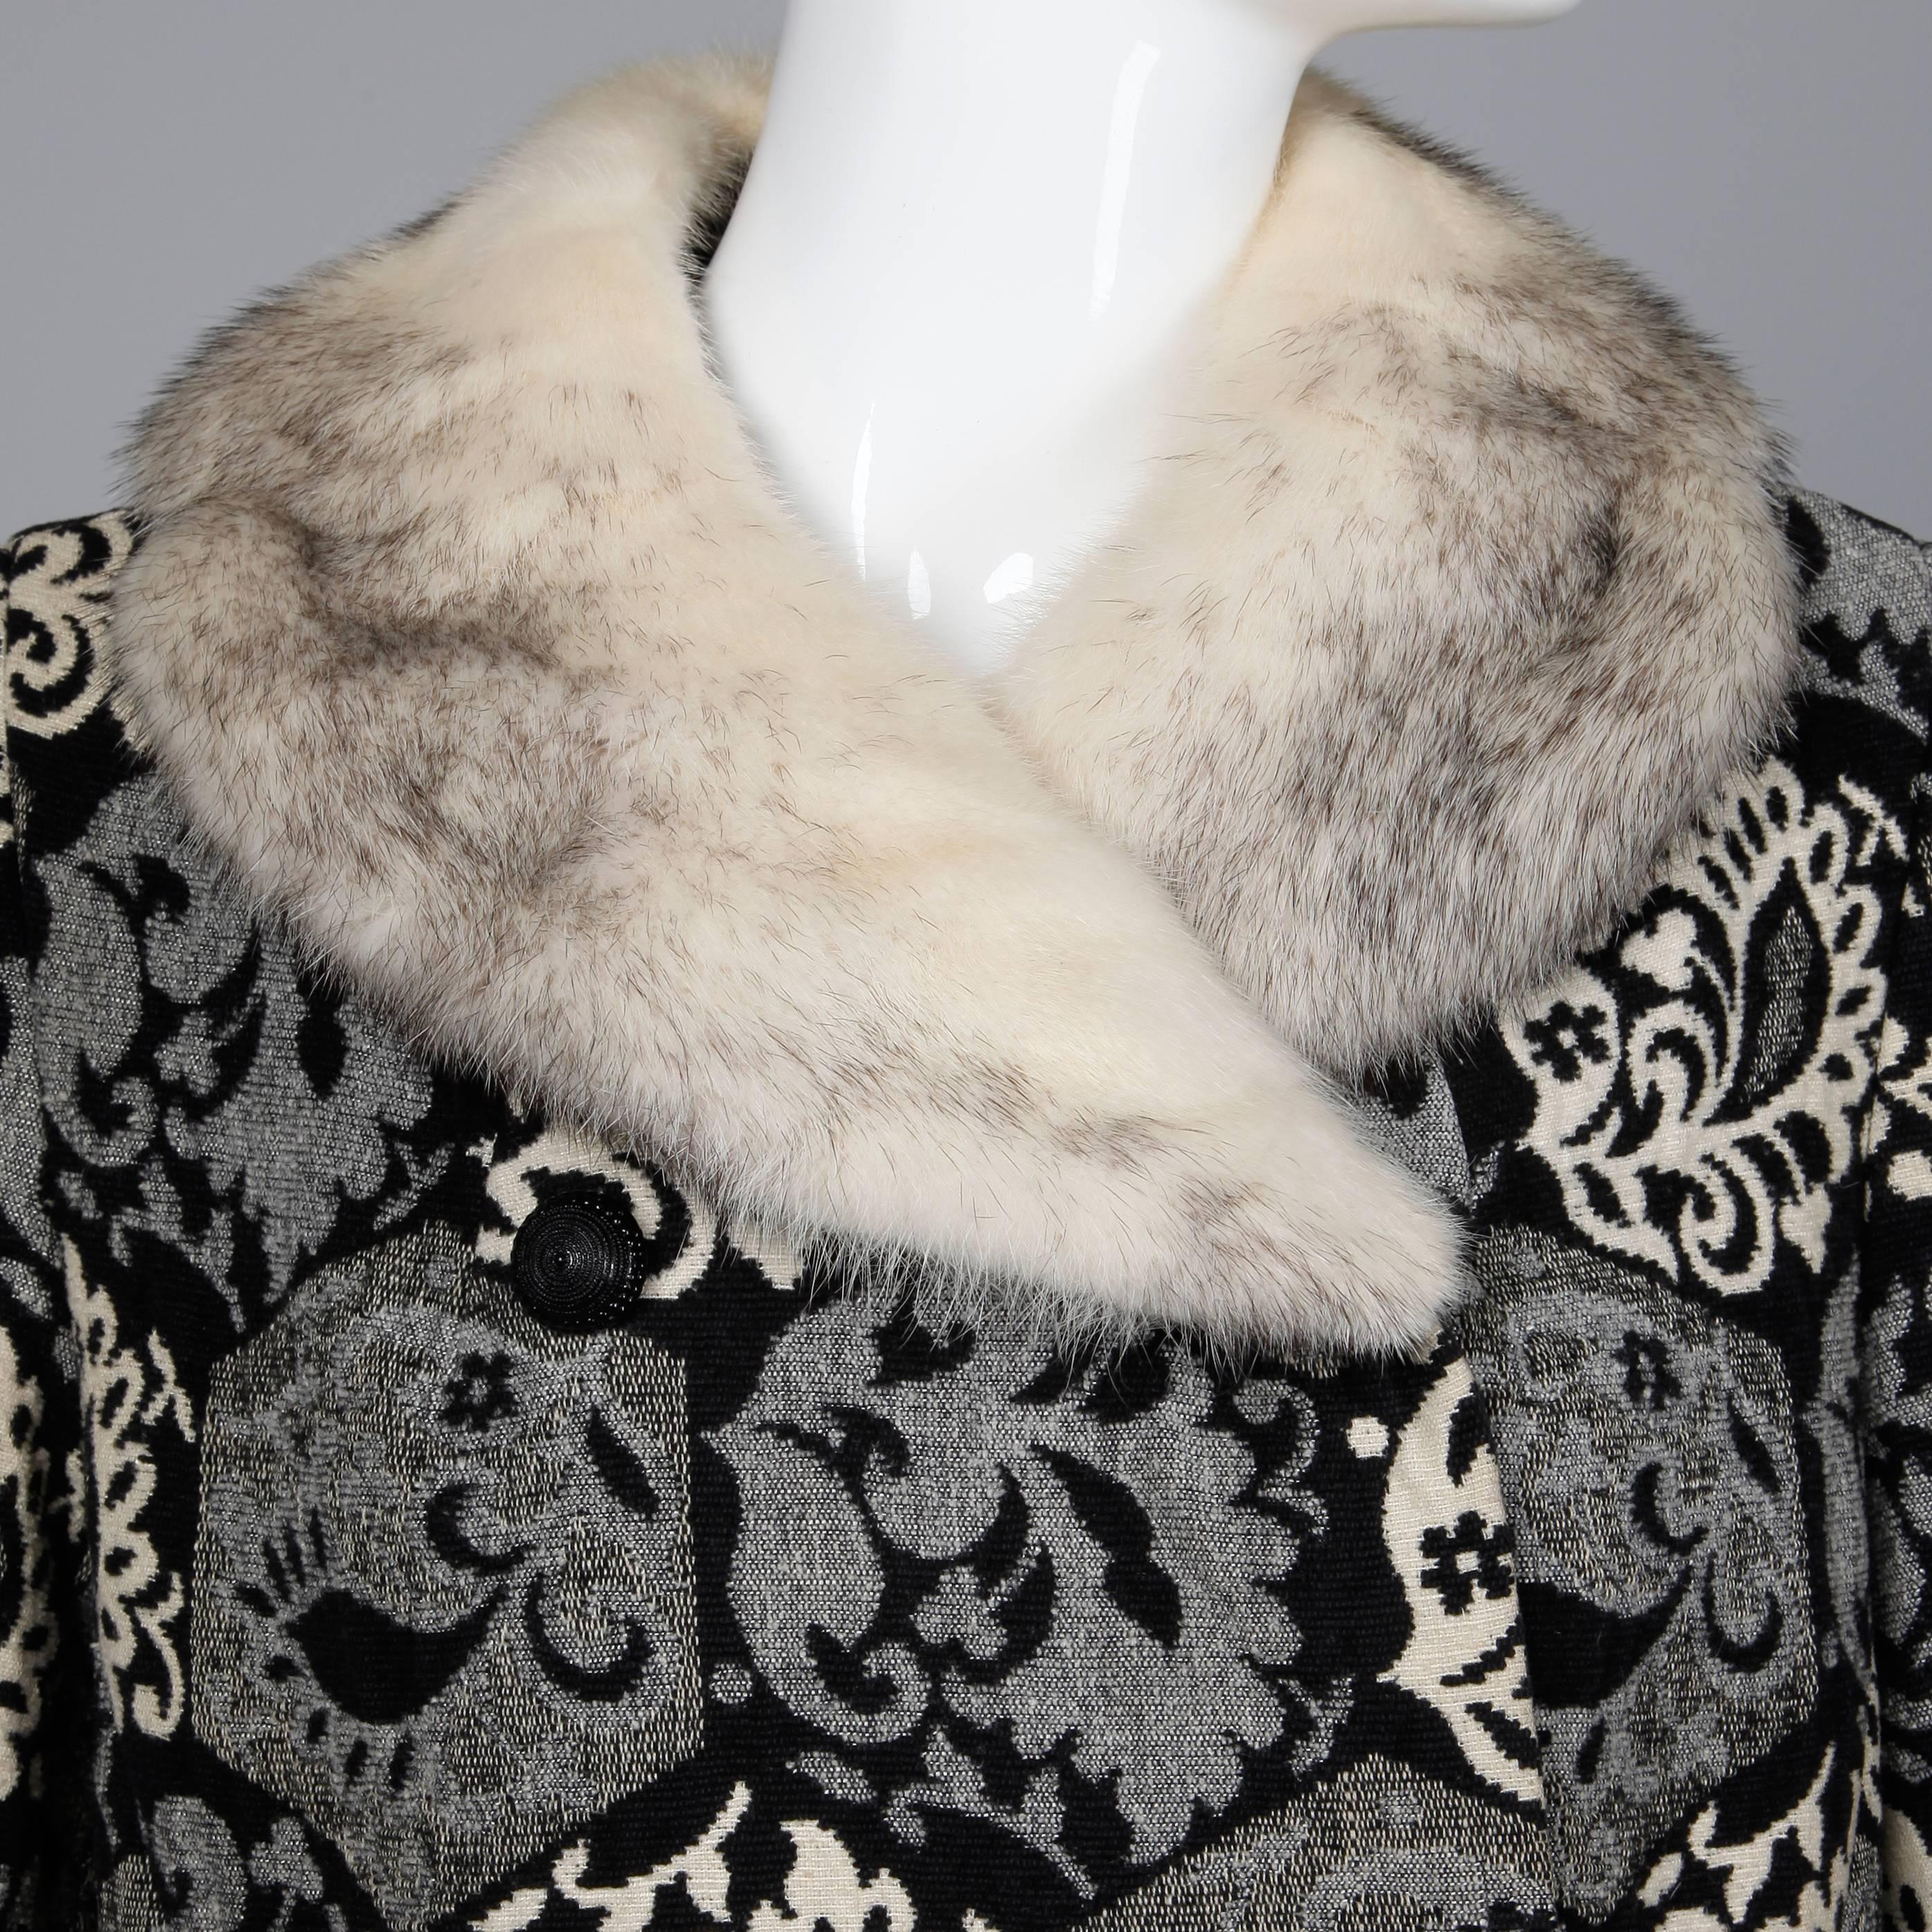 1960s Vintage Wool Tapestry Coat with Black, White Cross Mink Fur Collar + Cuffs 1